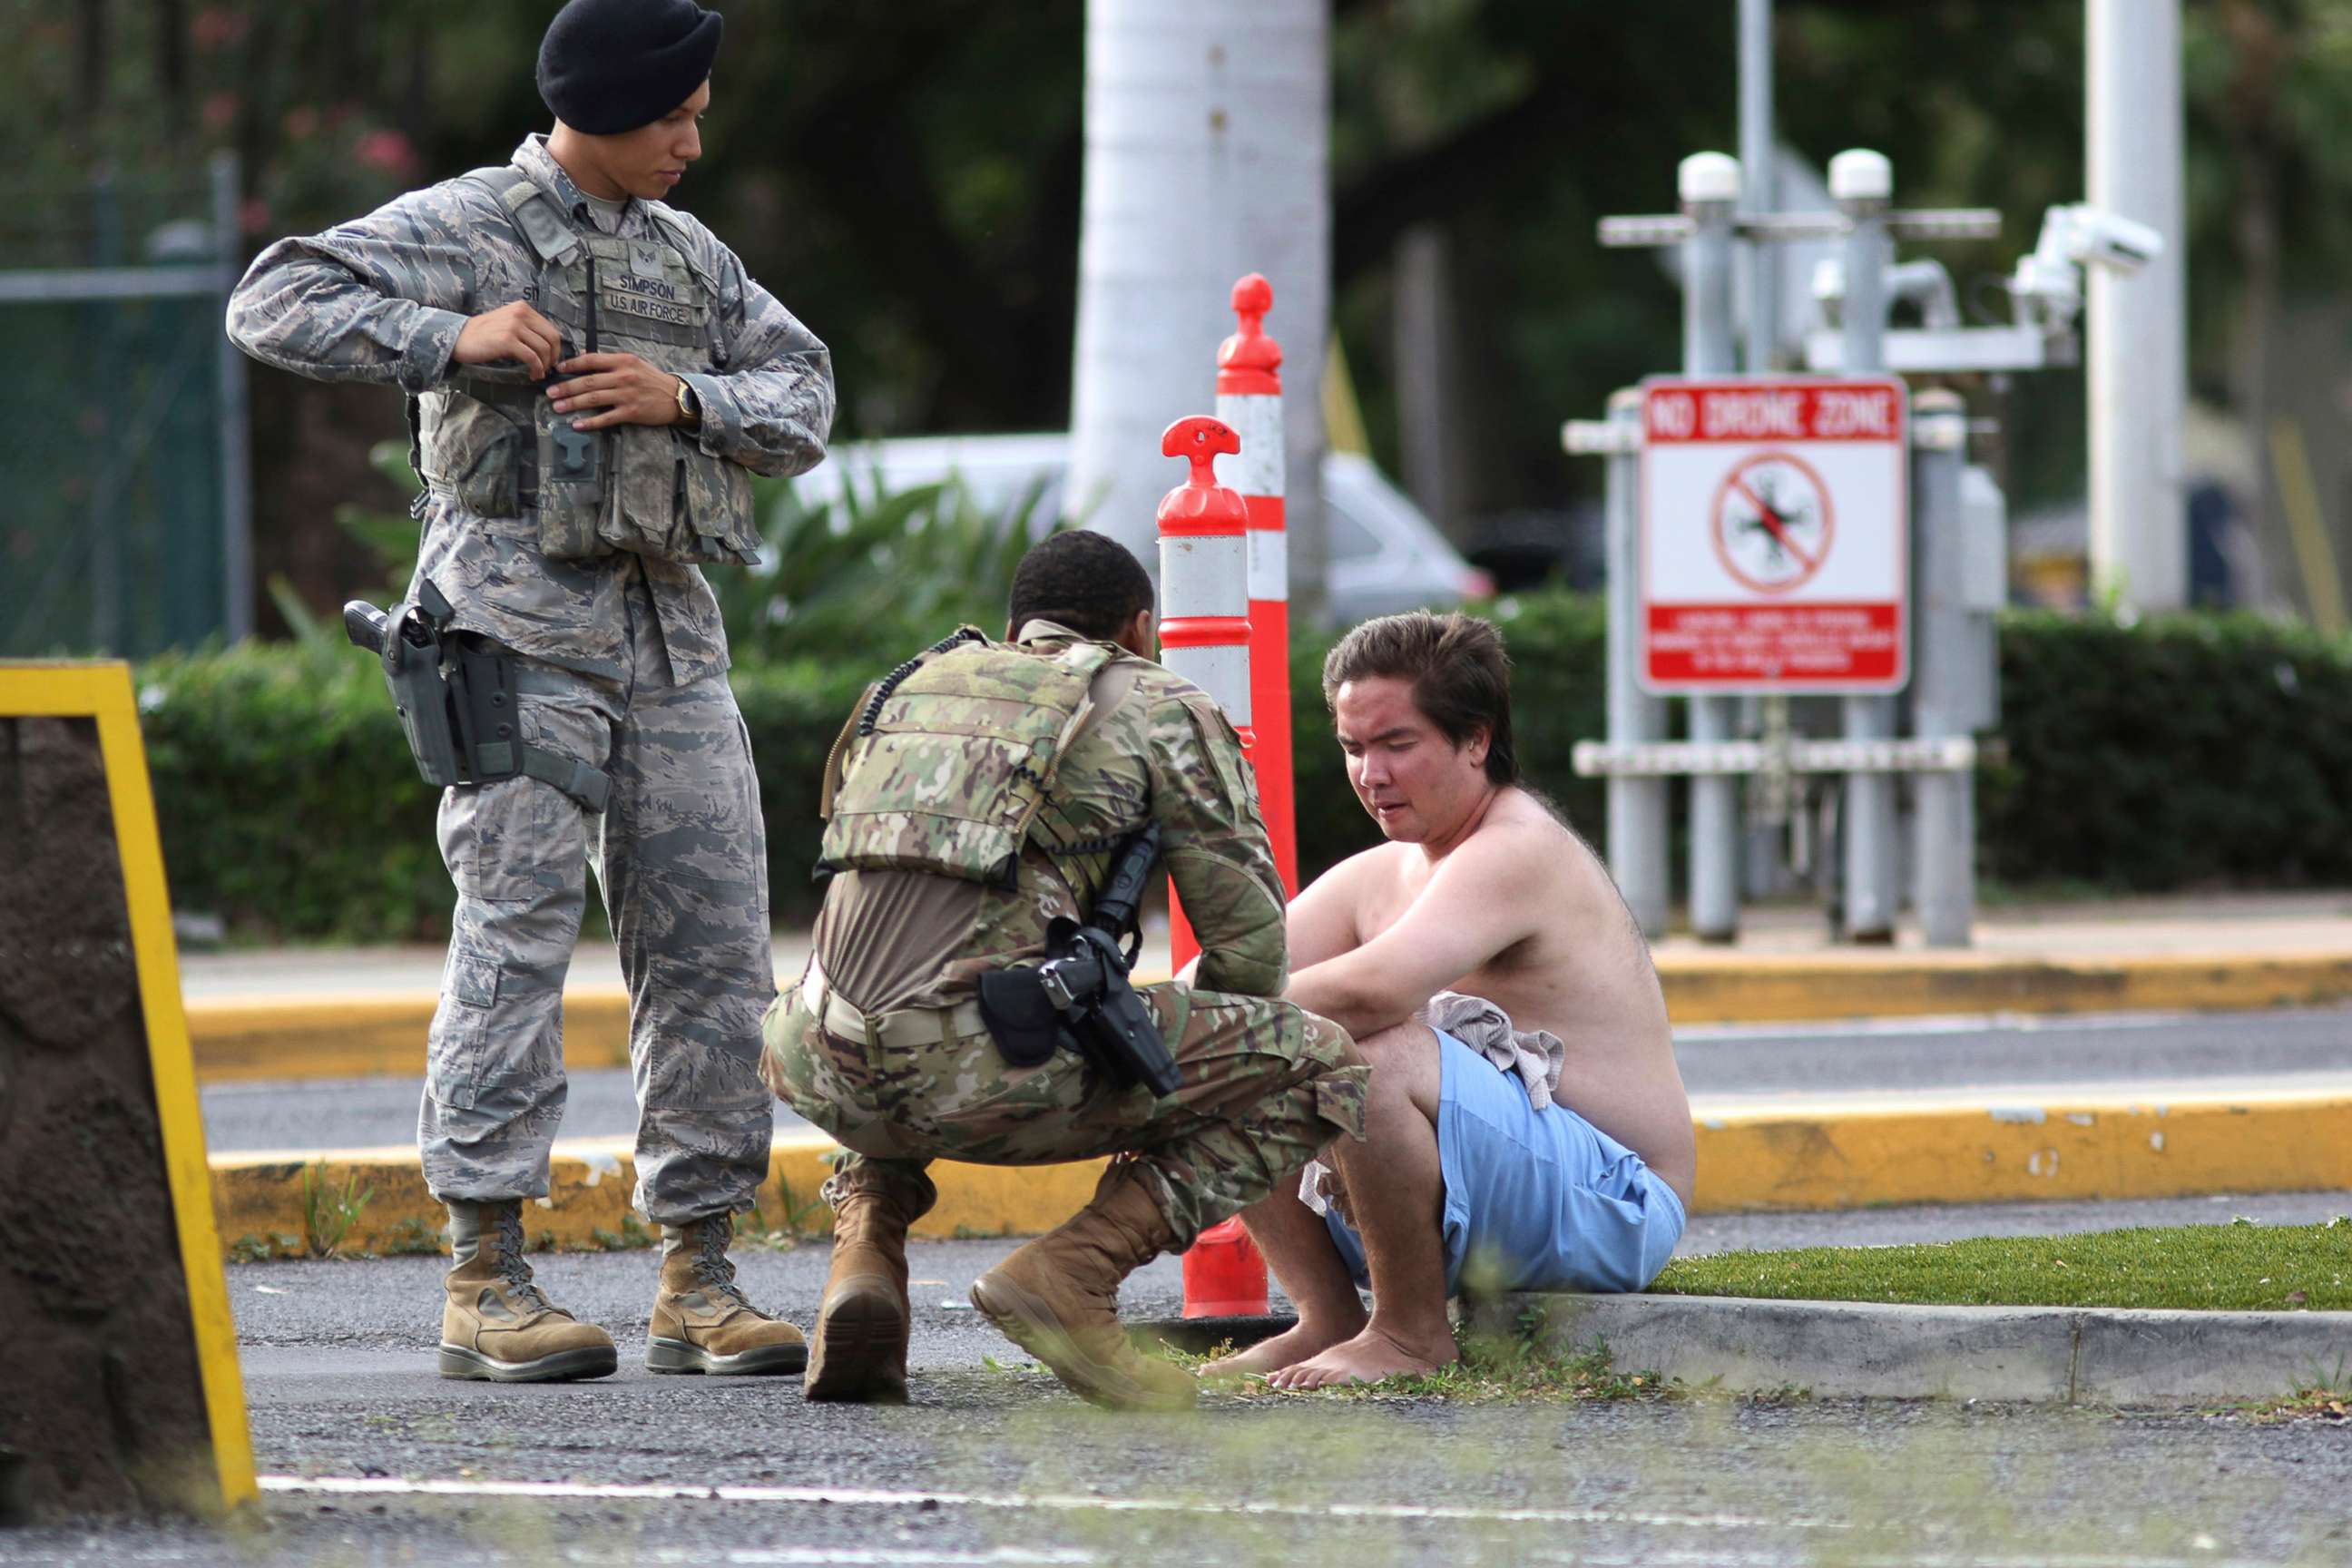 PHOTO: Security forces attend to an unidentified male outside the the main gate at Joint Base Pearl Harbor-Hickam, Dec. 4, 2019, in Hawaii, following a shooting.